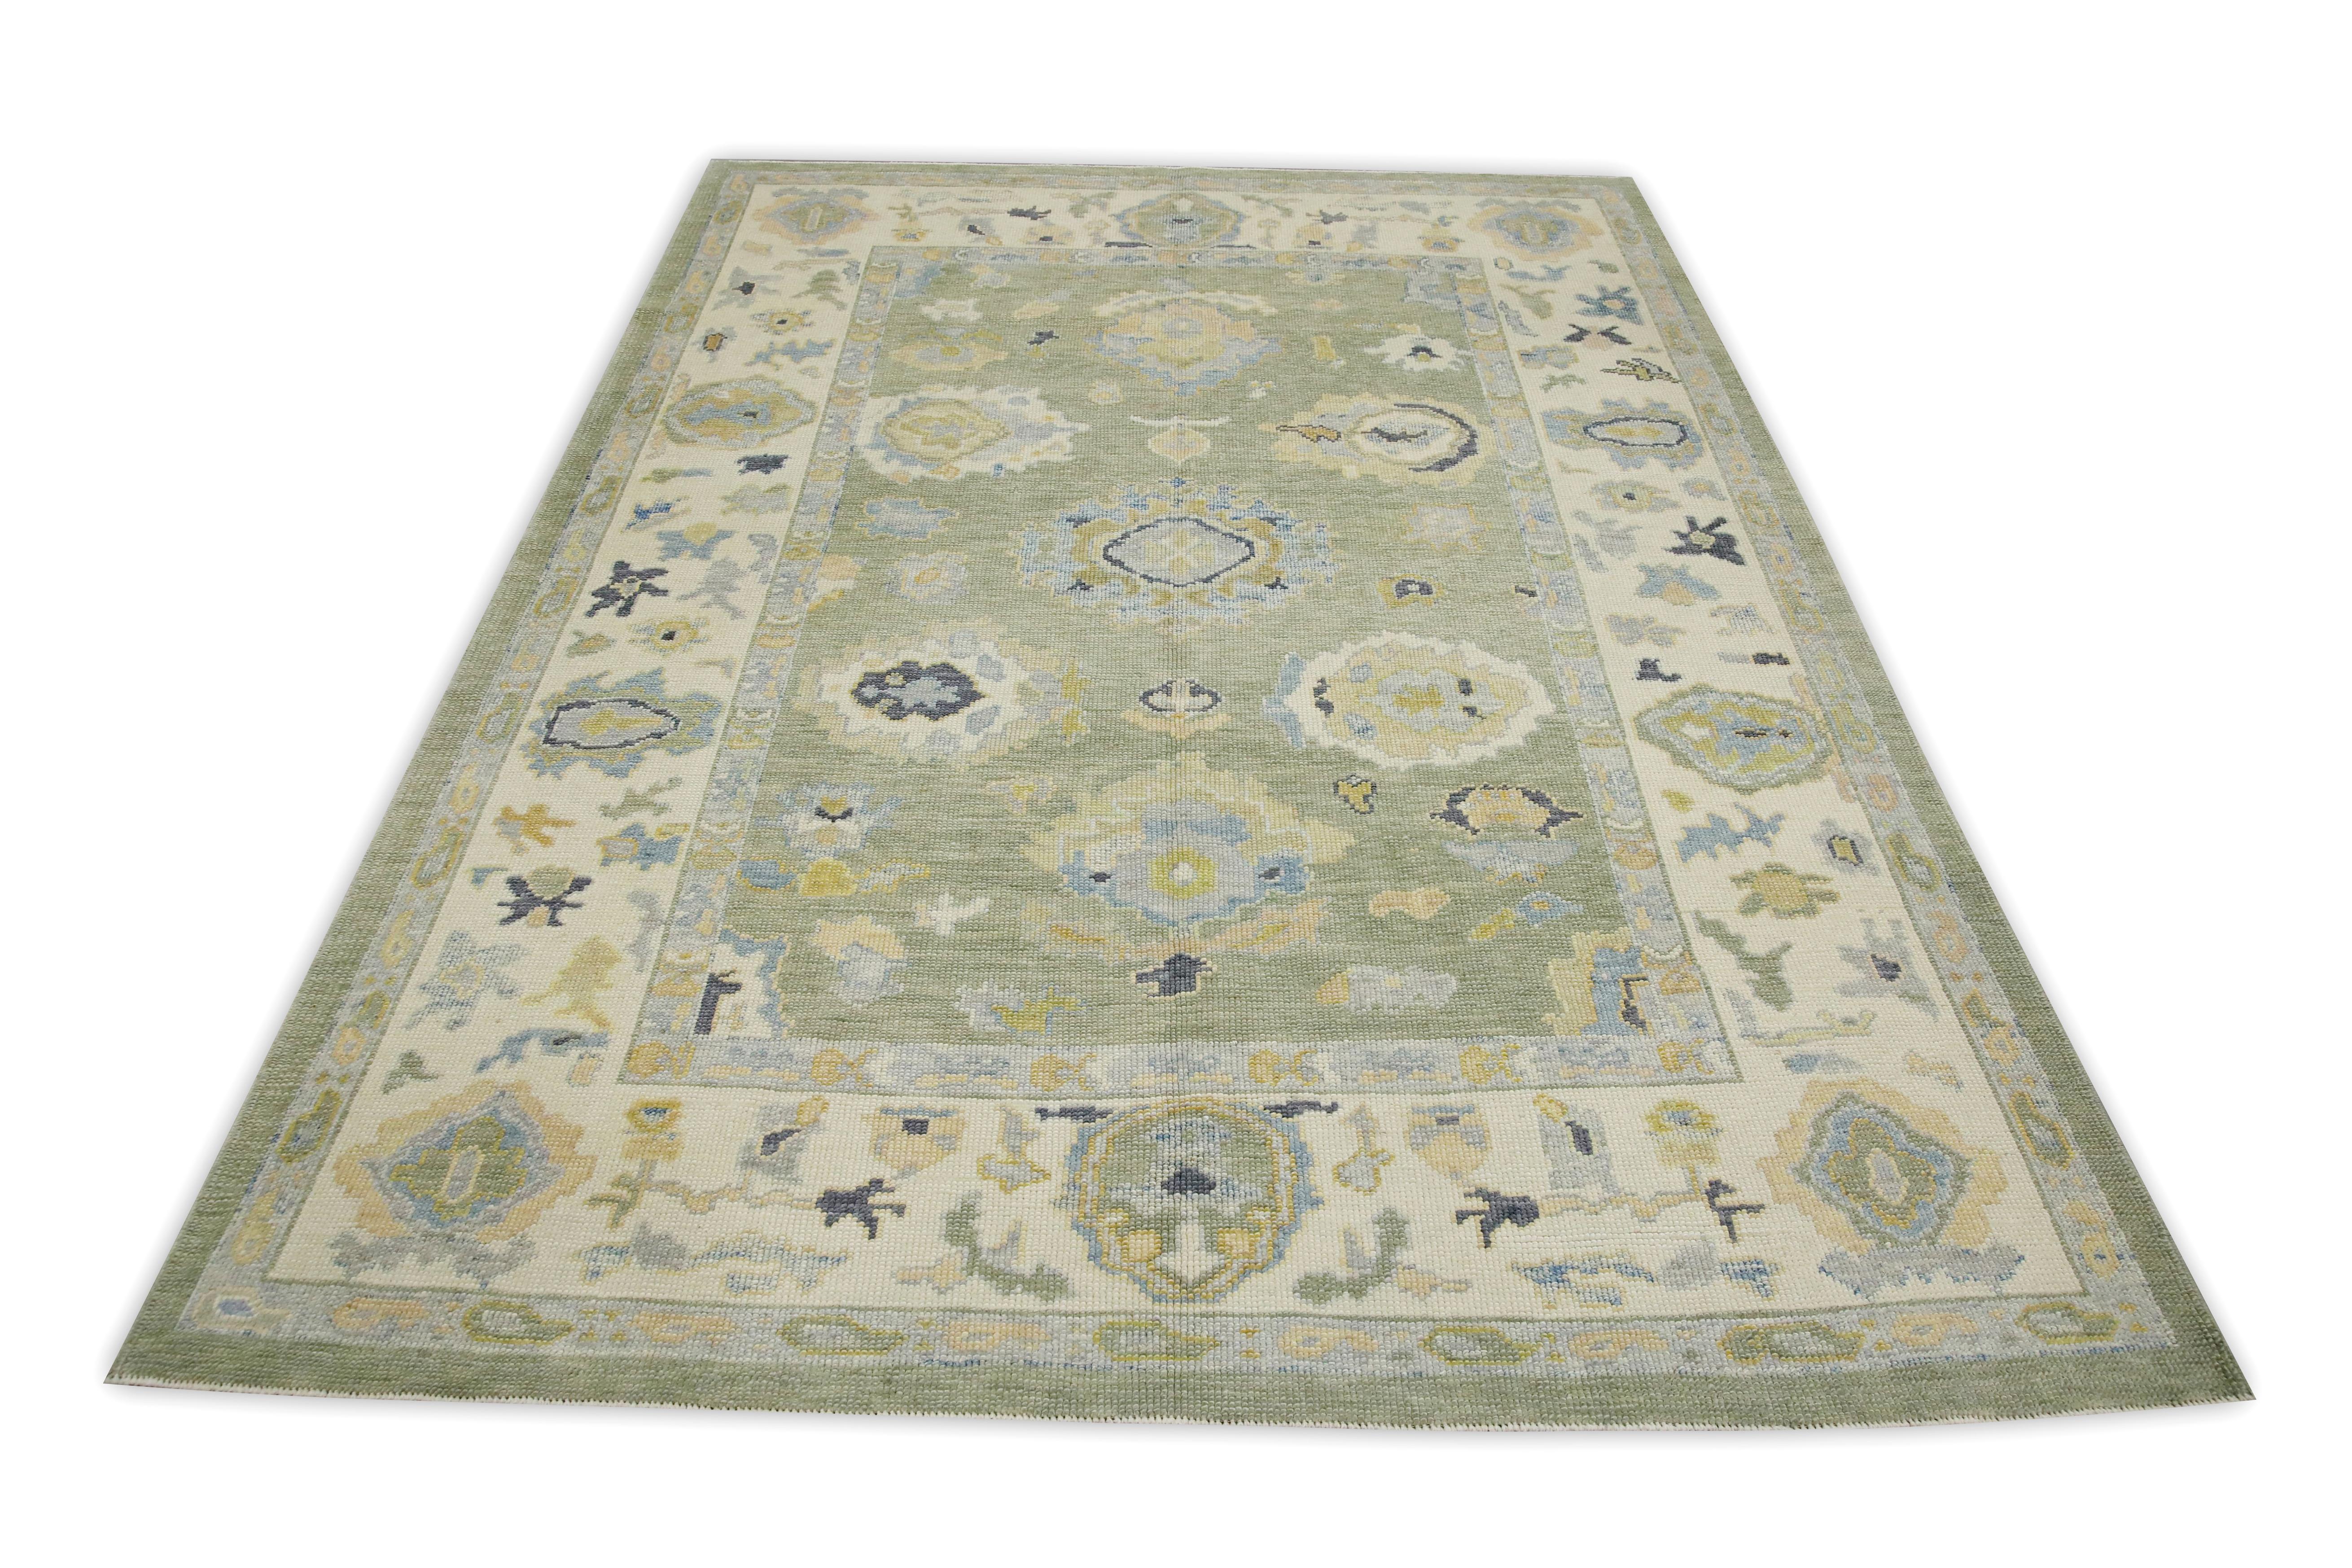 Contemporary Green Floral Design Handwoven Wool Turkish Oushak Rug 6'1